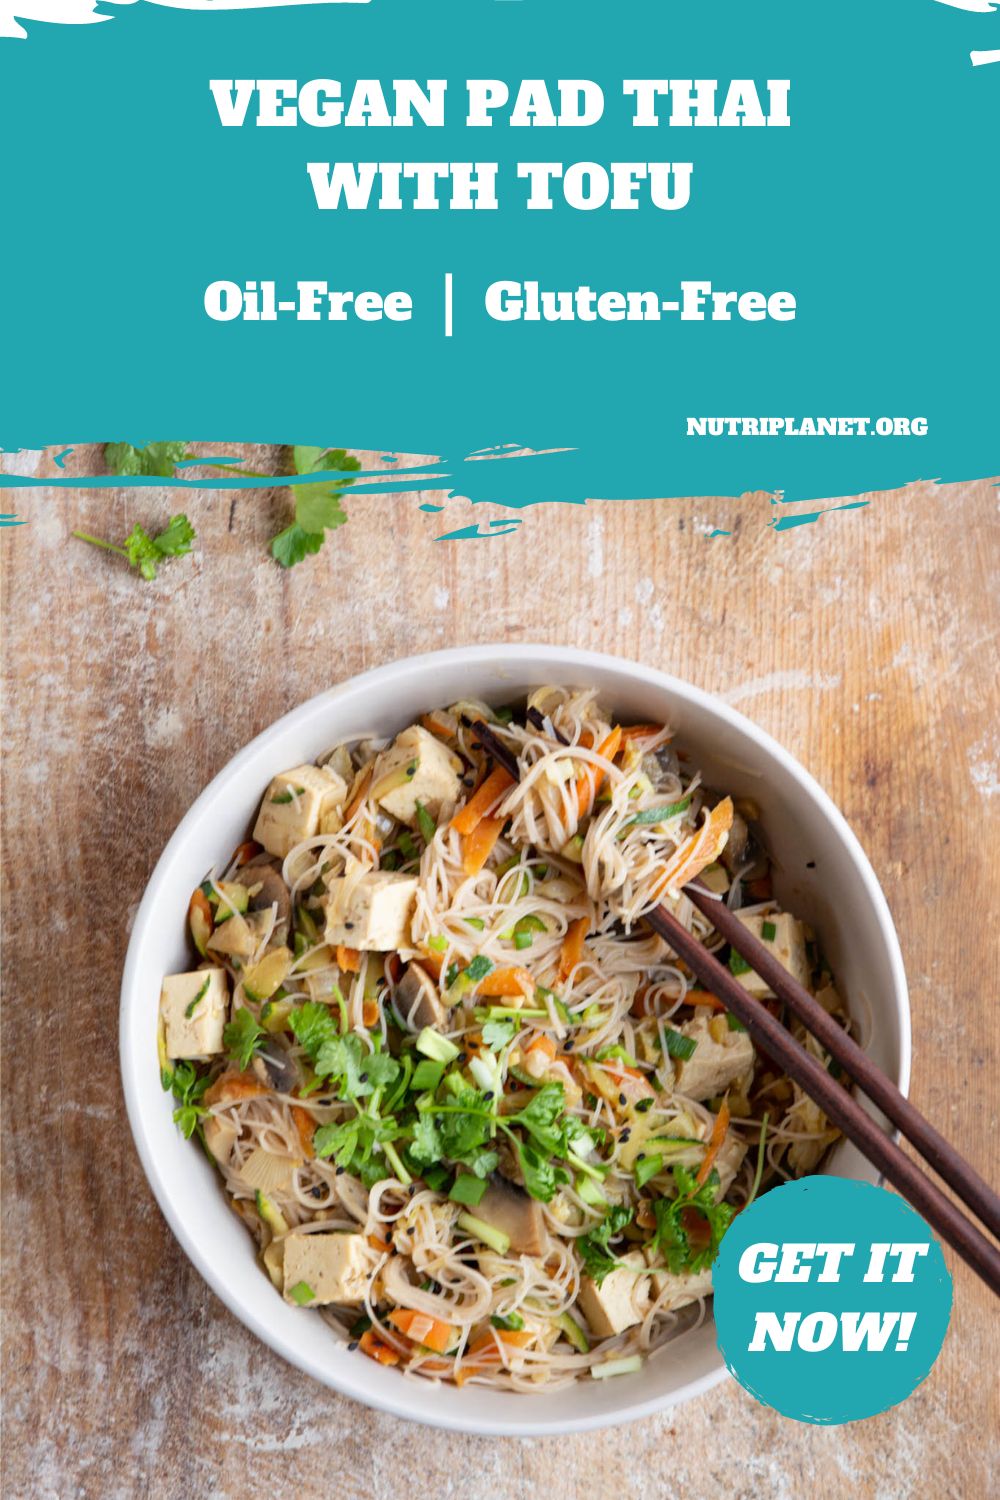 Try this healthy version of vegan pad thai that uses no oil or dairy products. It's a perfect weekday meal that'll fill you up.